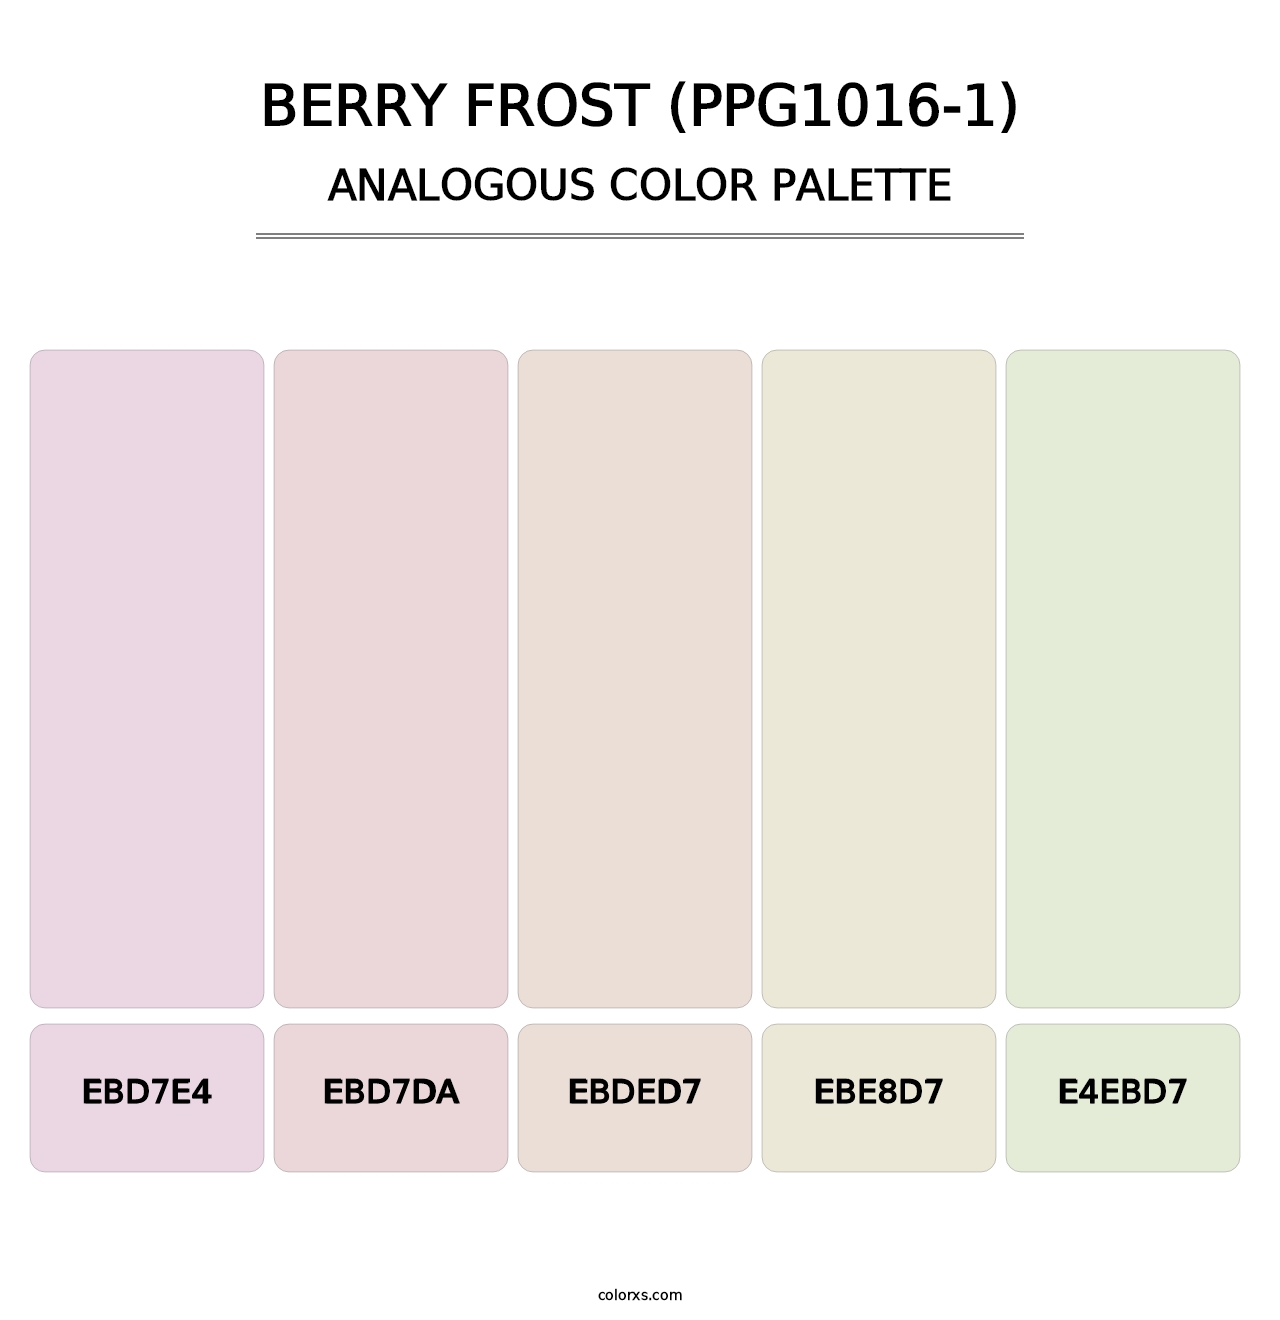 Berry Frost (PPG1016-1) - Analogous Color Palette